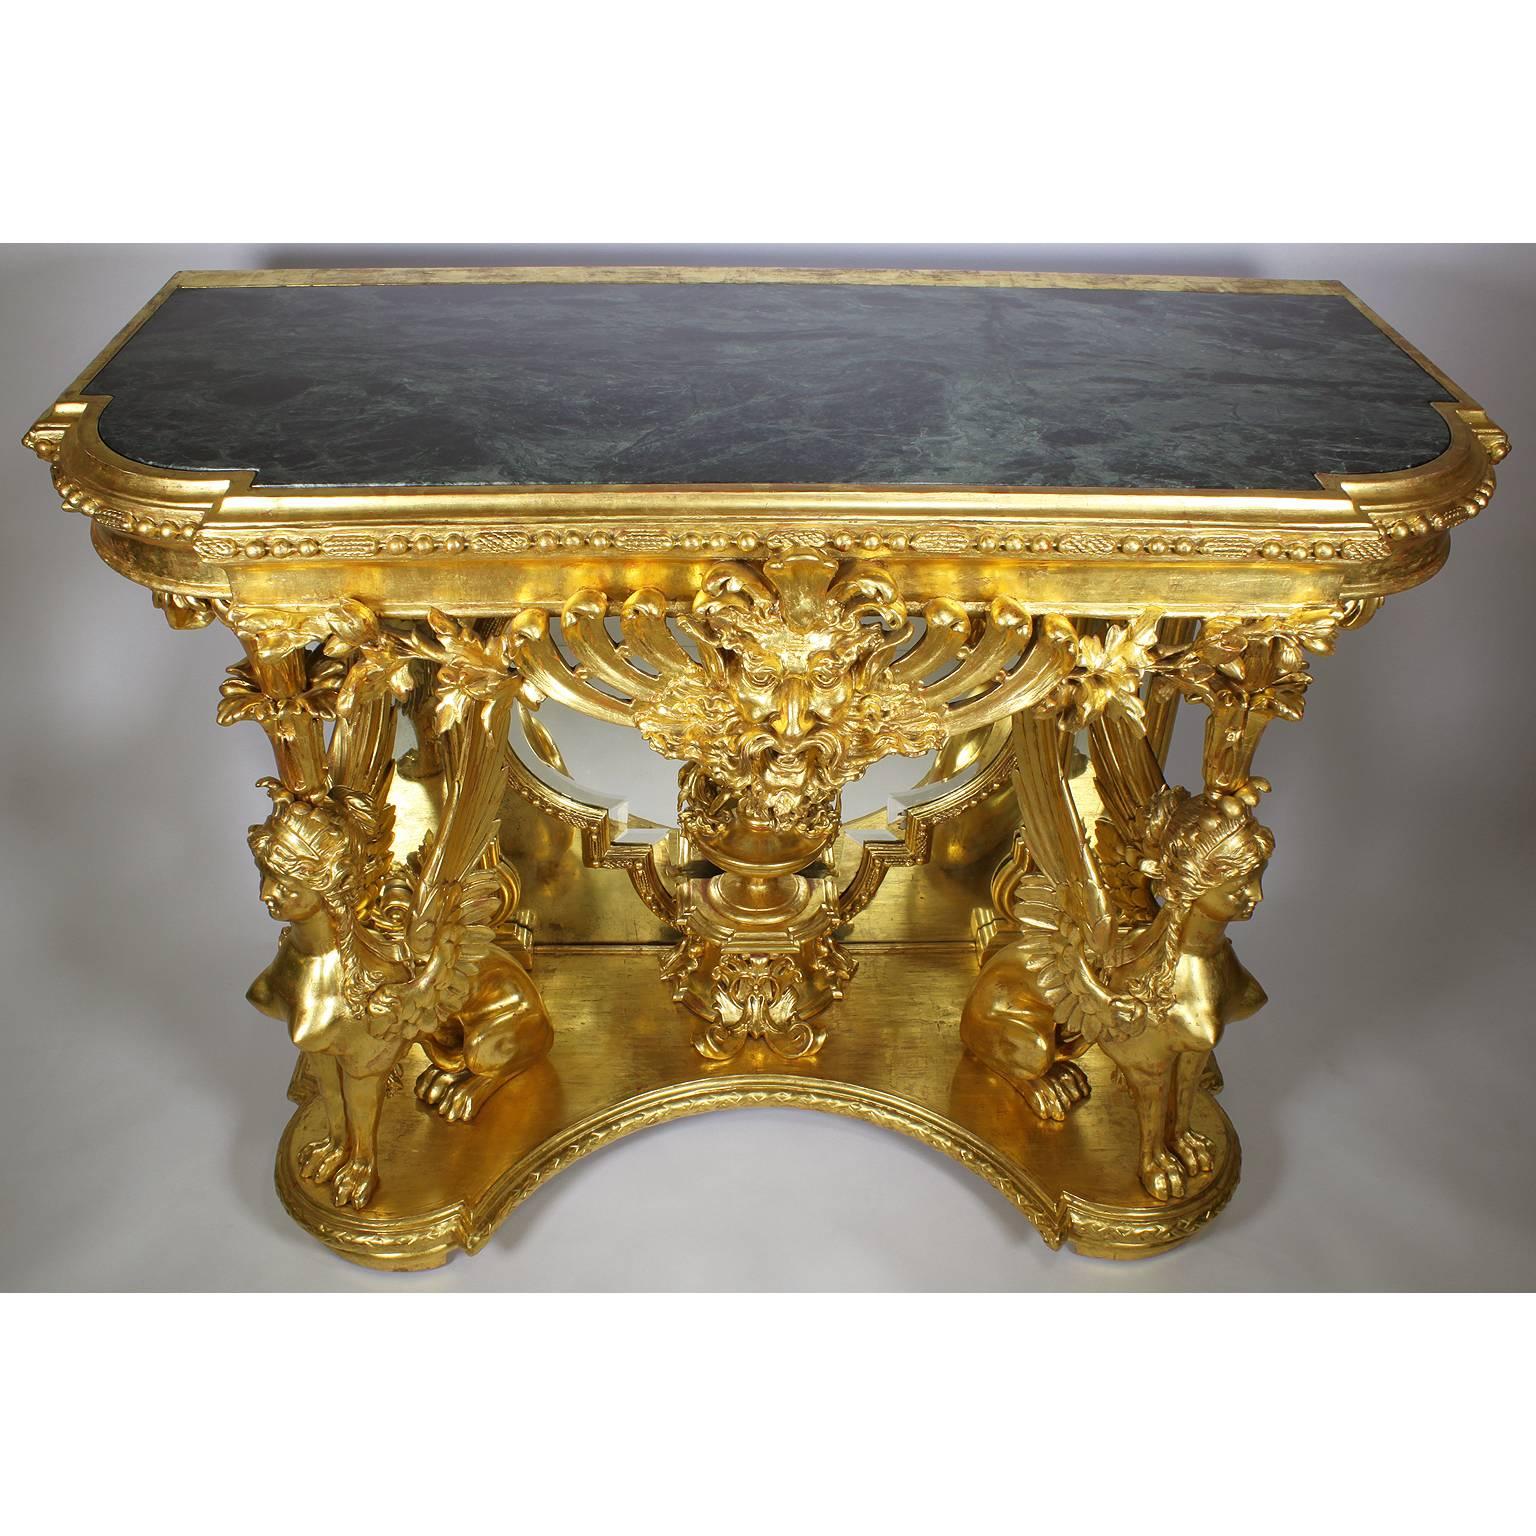 French Empire Revival 19th Century Giltwood Carved Figural Console and Mirror For Sale 3